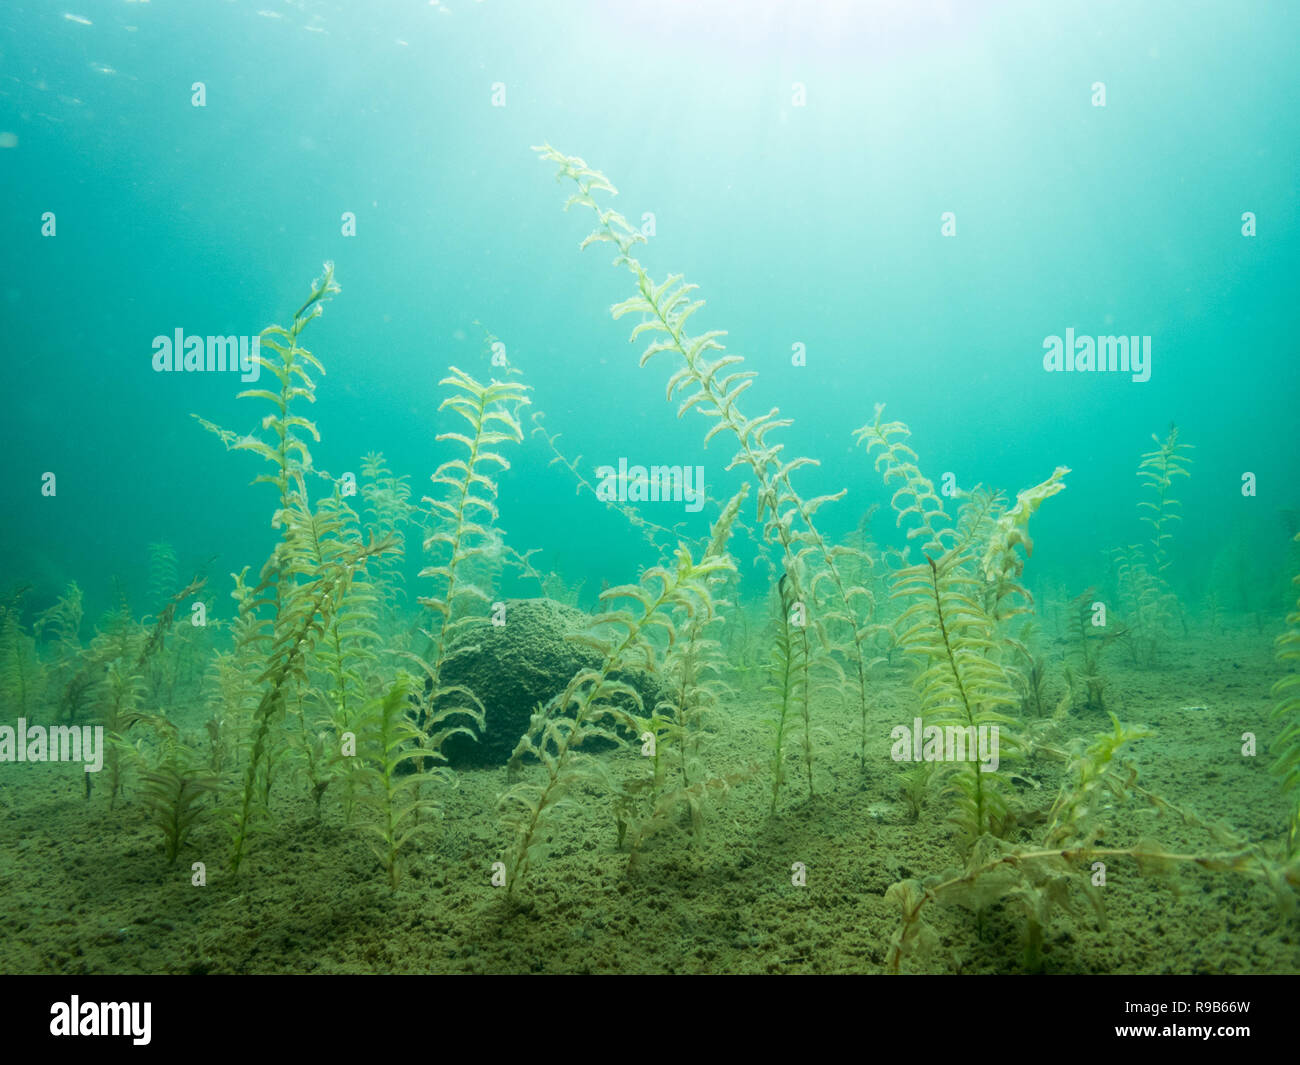 Underwater landscape with claspingleaf pondweed (Potamogeton perfoliatus) water plants in clear-watered lake. Stock Photo